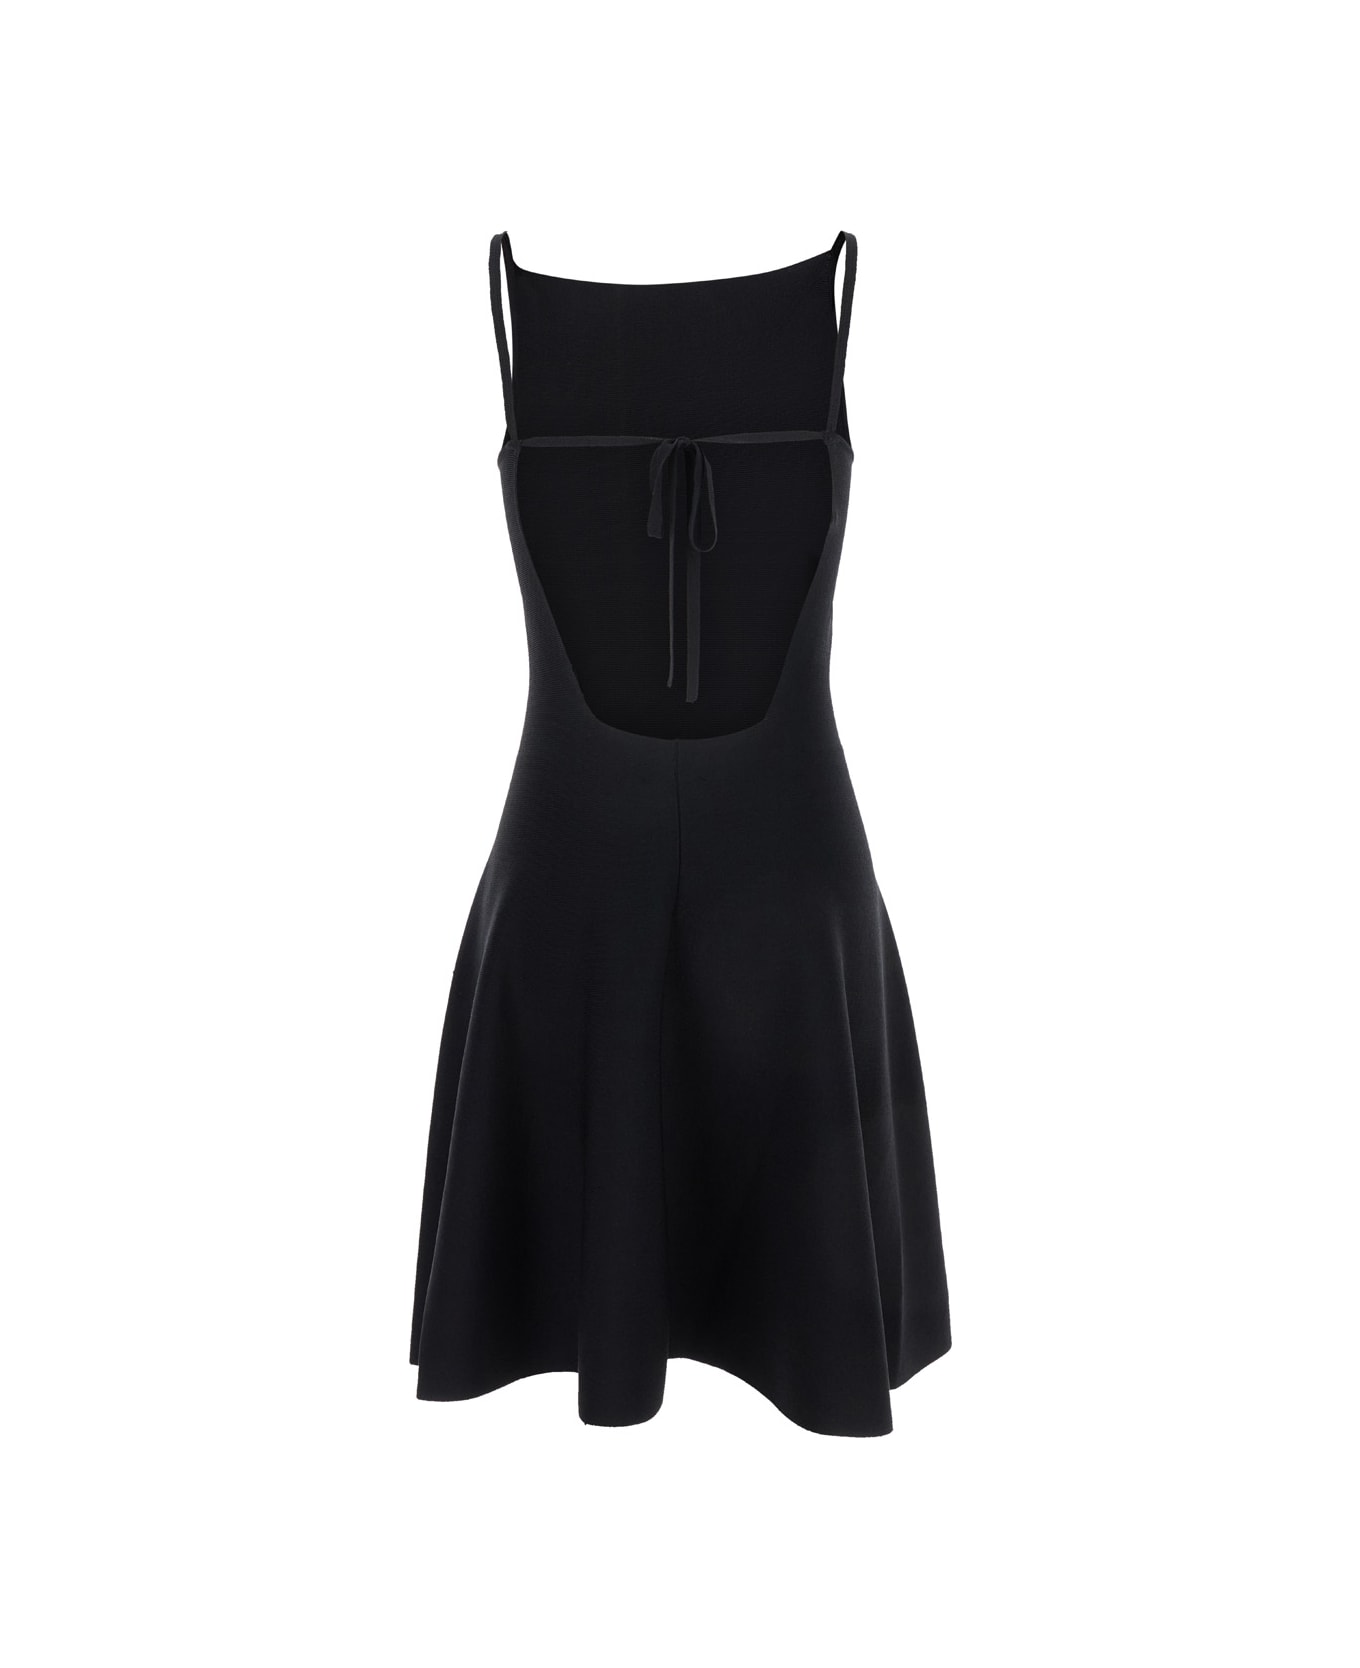 SEMICOUTURE Mini Black Dress With Open Back In Viscose Blend Woman - Black